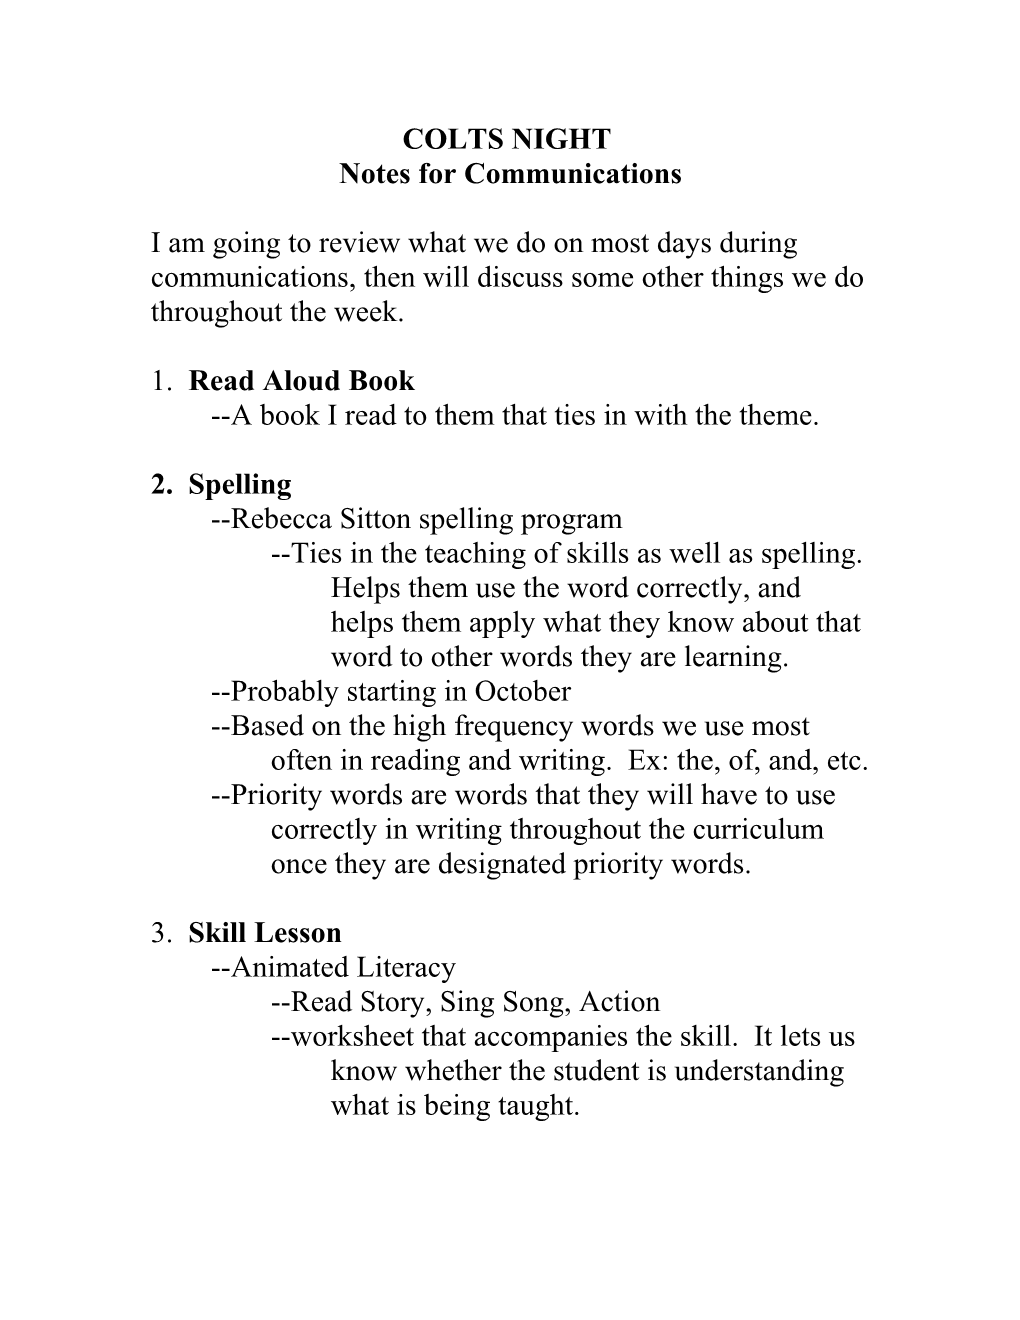 Notes for Communications